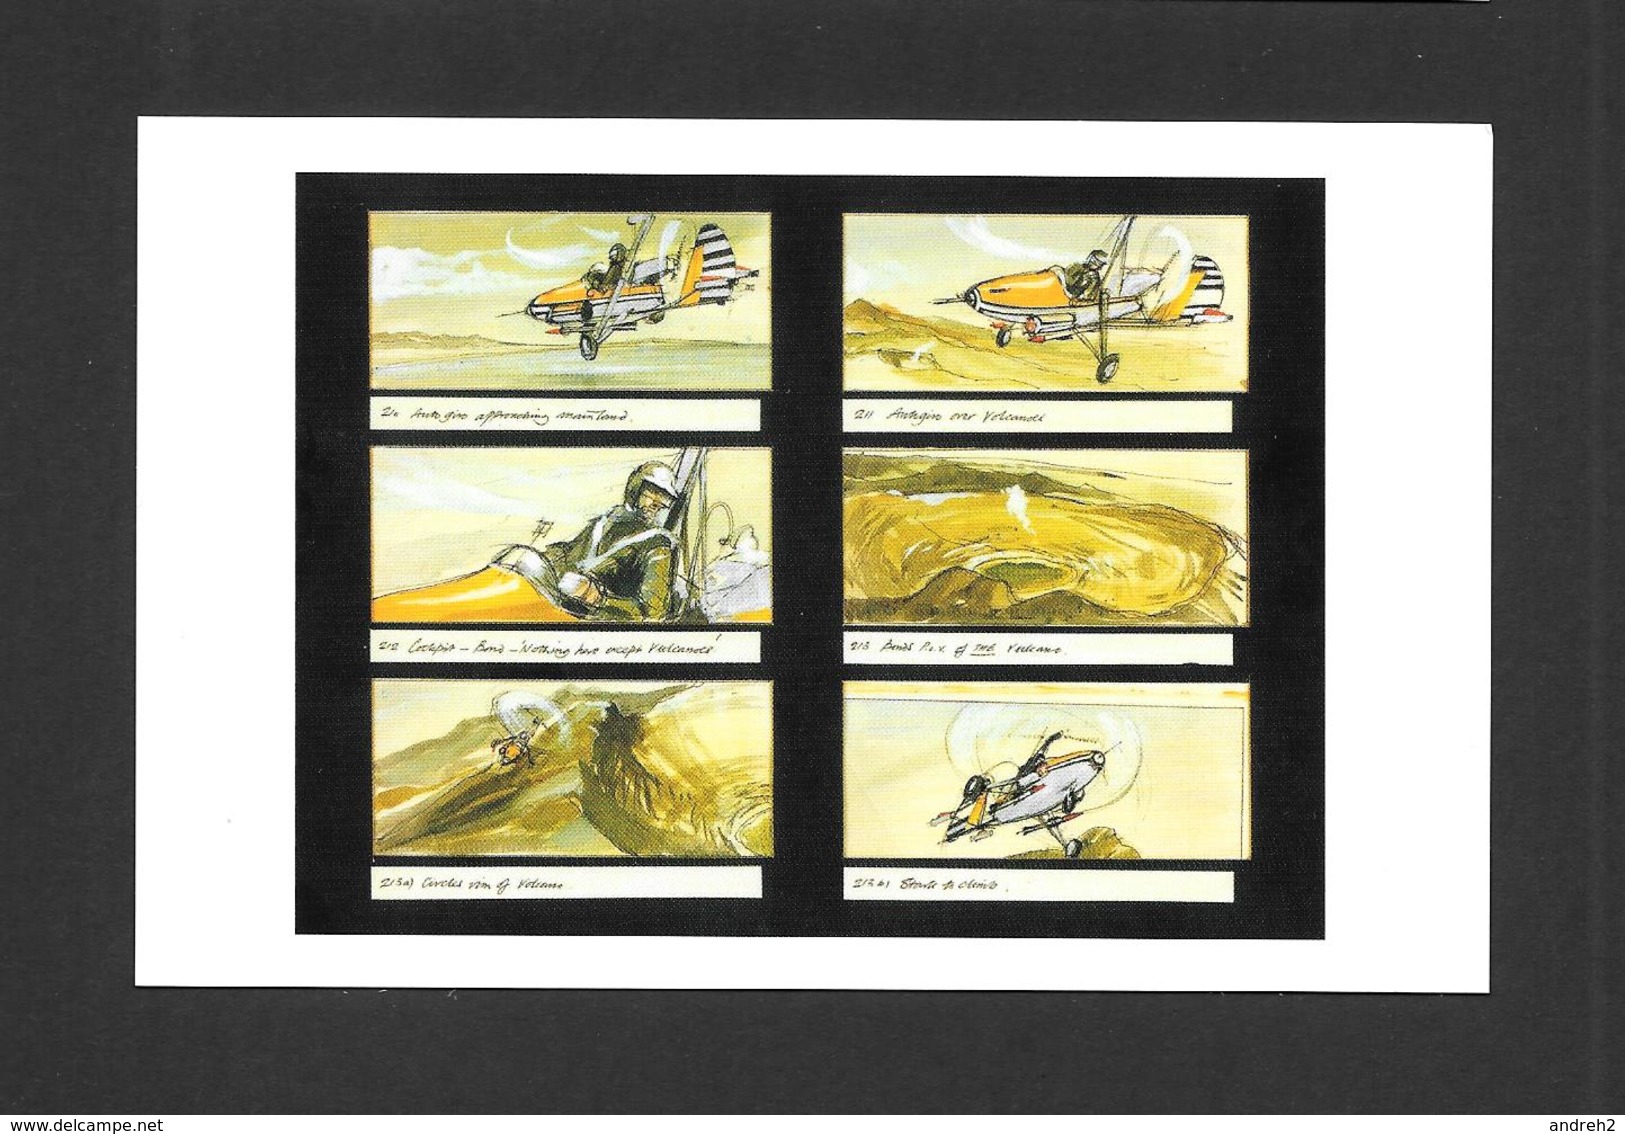 AFFICHES - CARTE POSTALE - JAMES BOND AGENT 007 - STORYBOARD FEATURING FLYING NELLIE  FOR YOU ONLY LIVE TWICE (1967) - Manifesti Su Carta